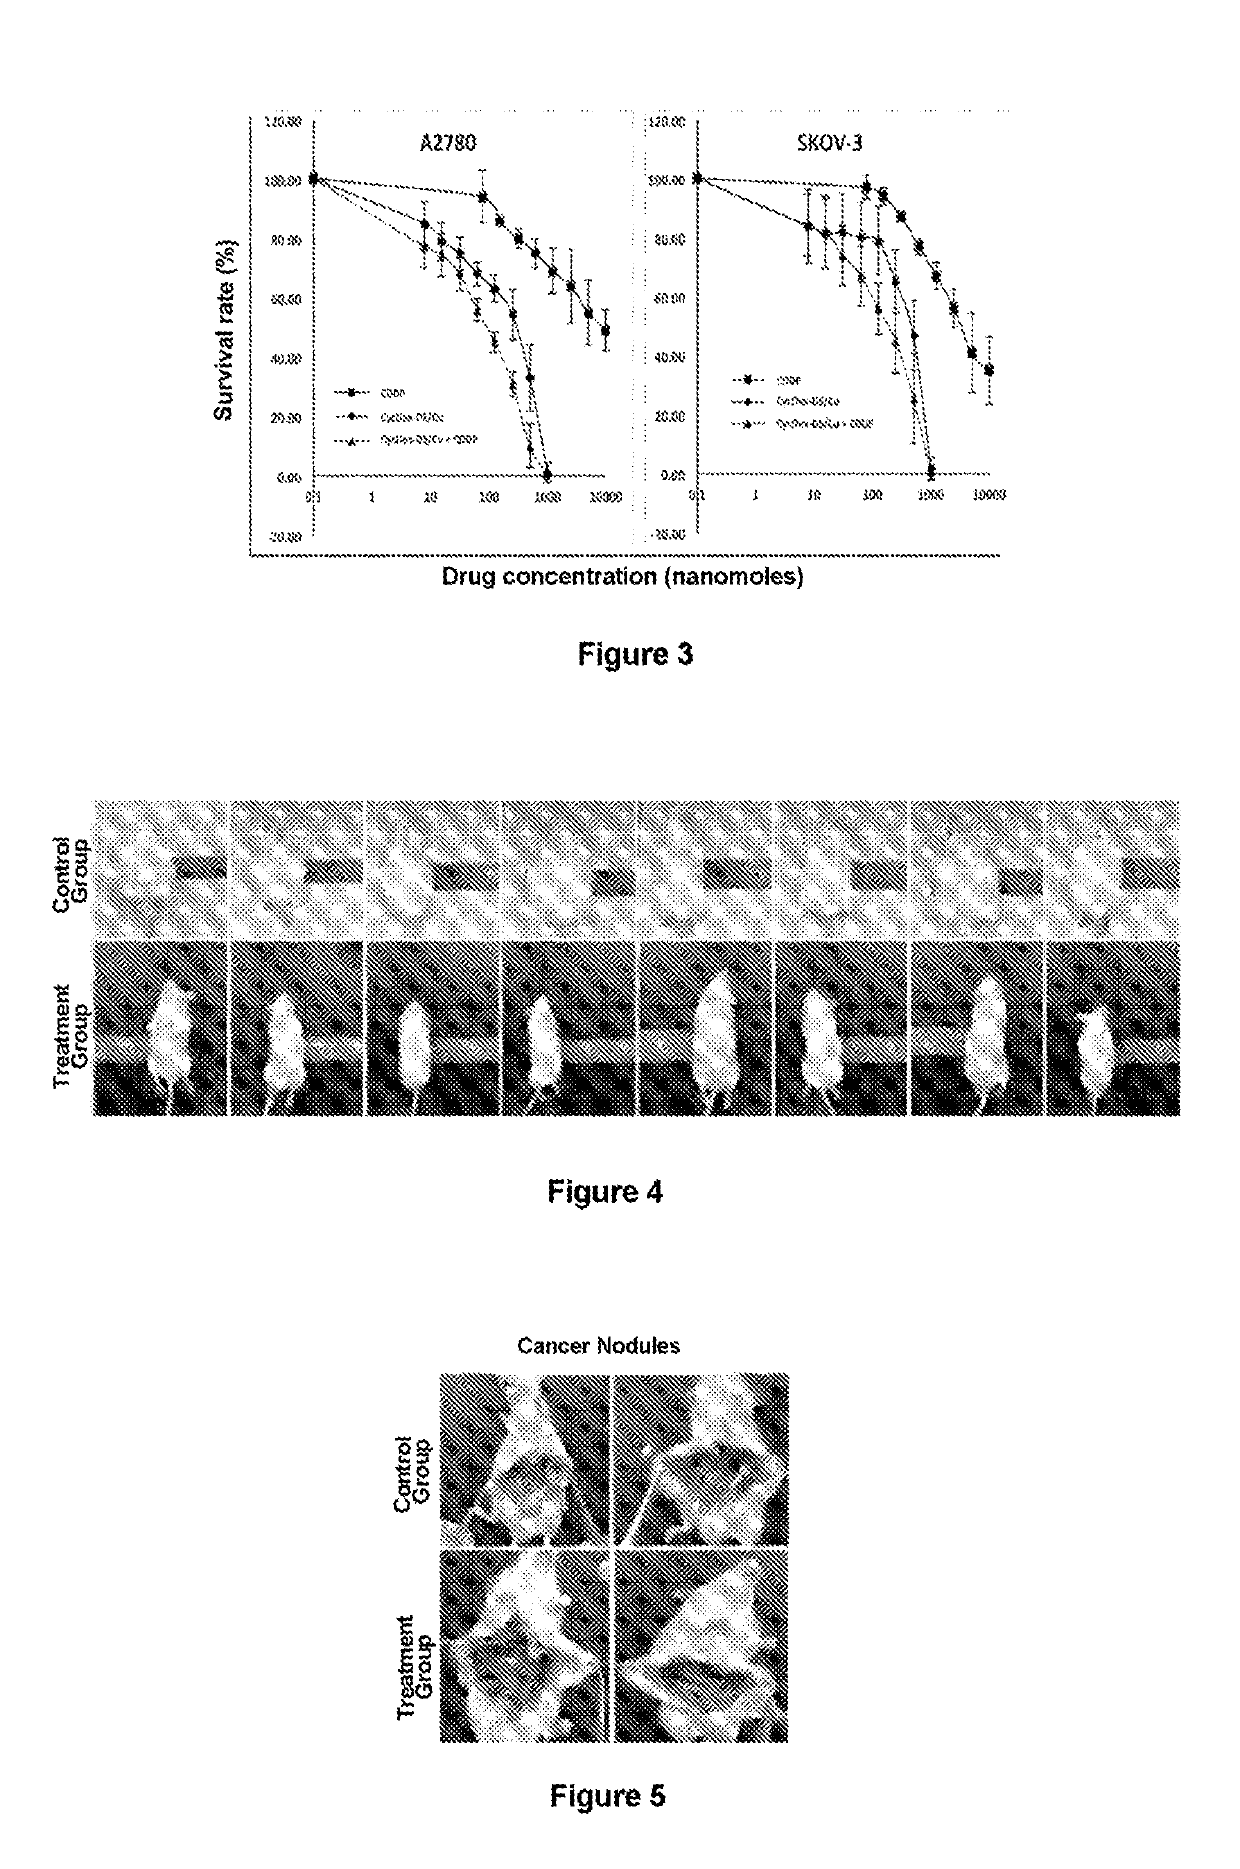 Method for treating pleuroperitoneal membrane cancers by locally injecting disulfiram preparation